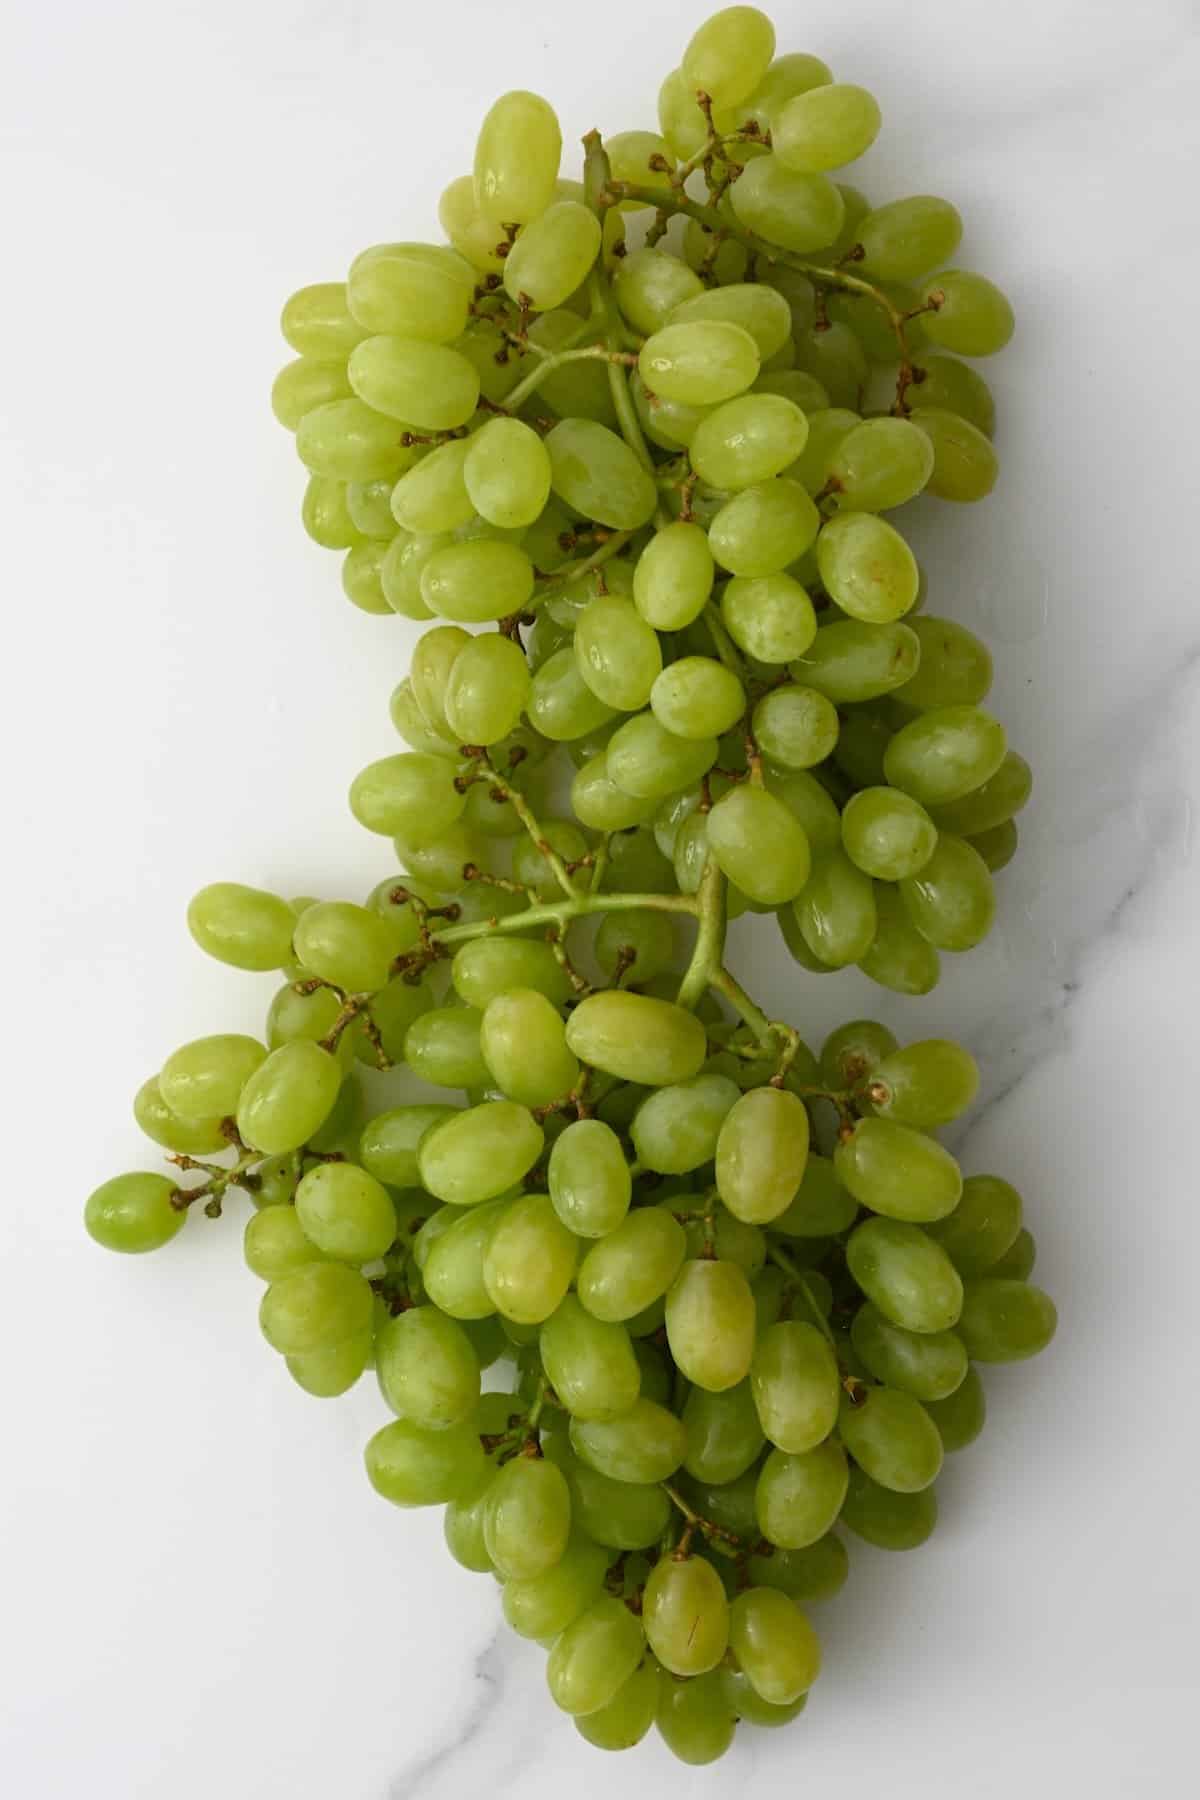 Green grapes on a flat surface